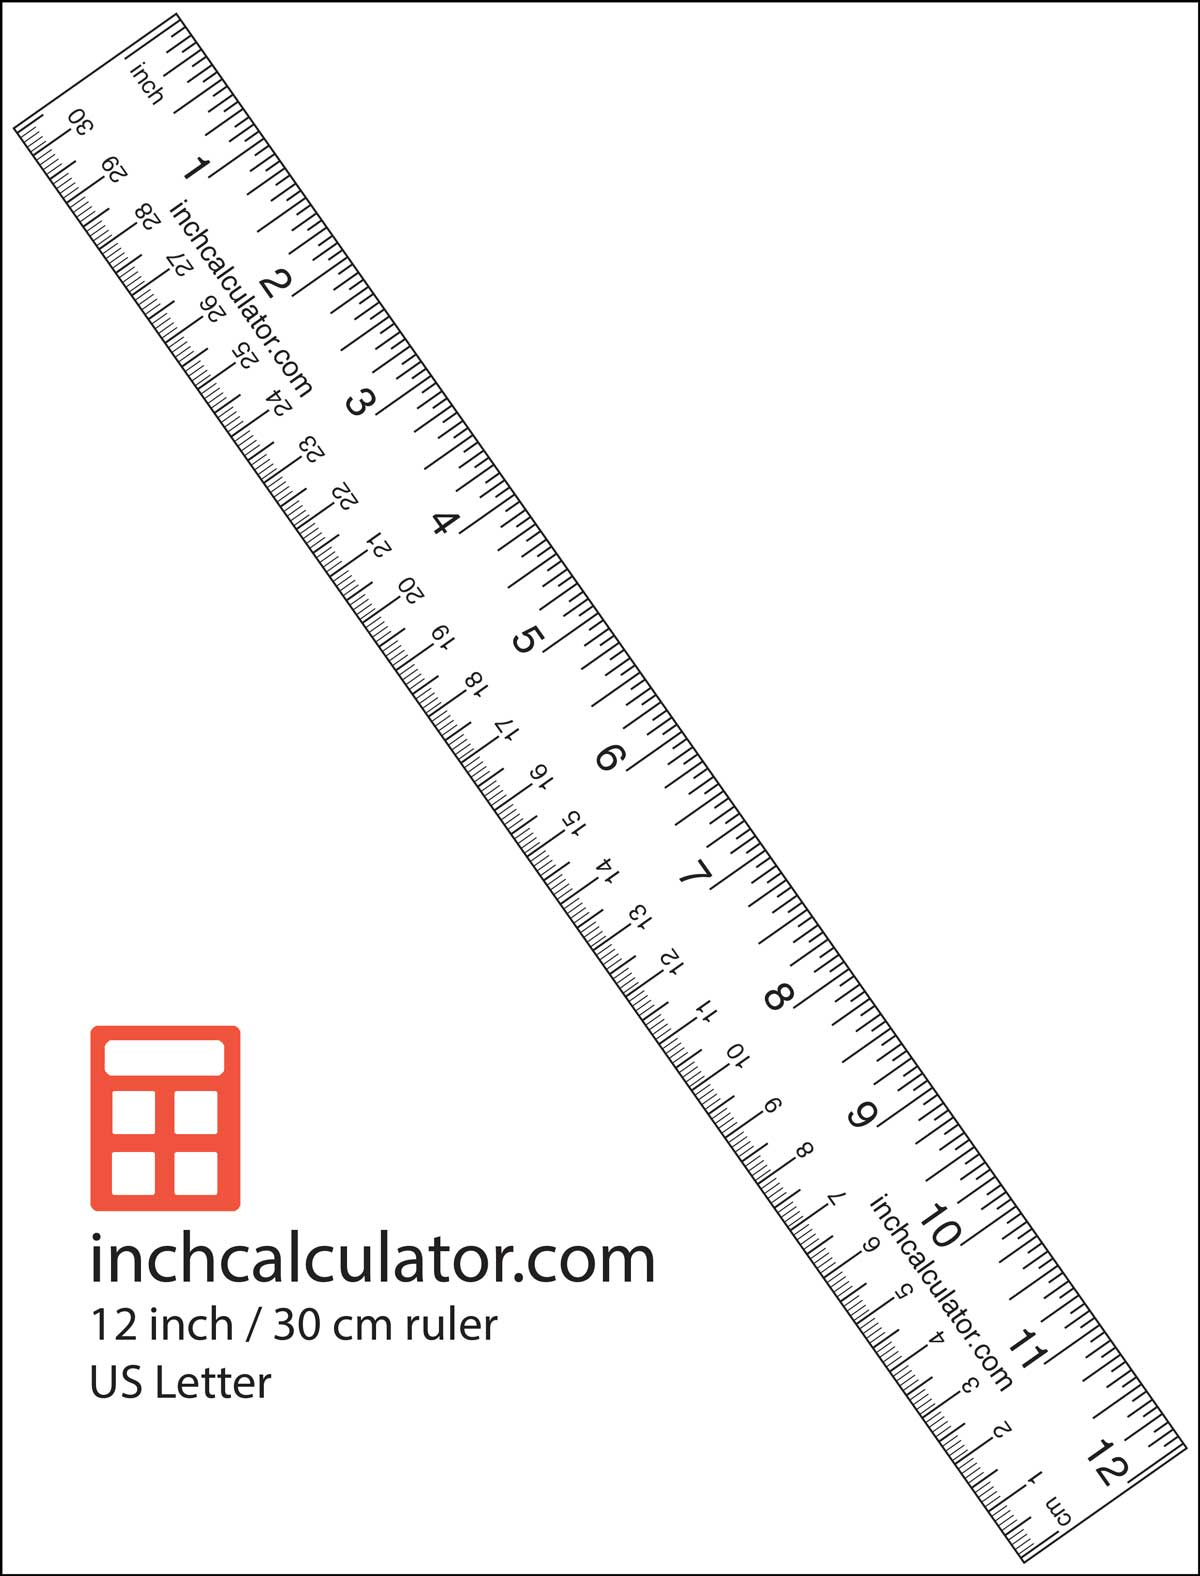 Ruler Print Out - Terete